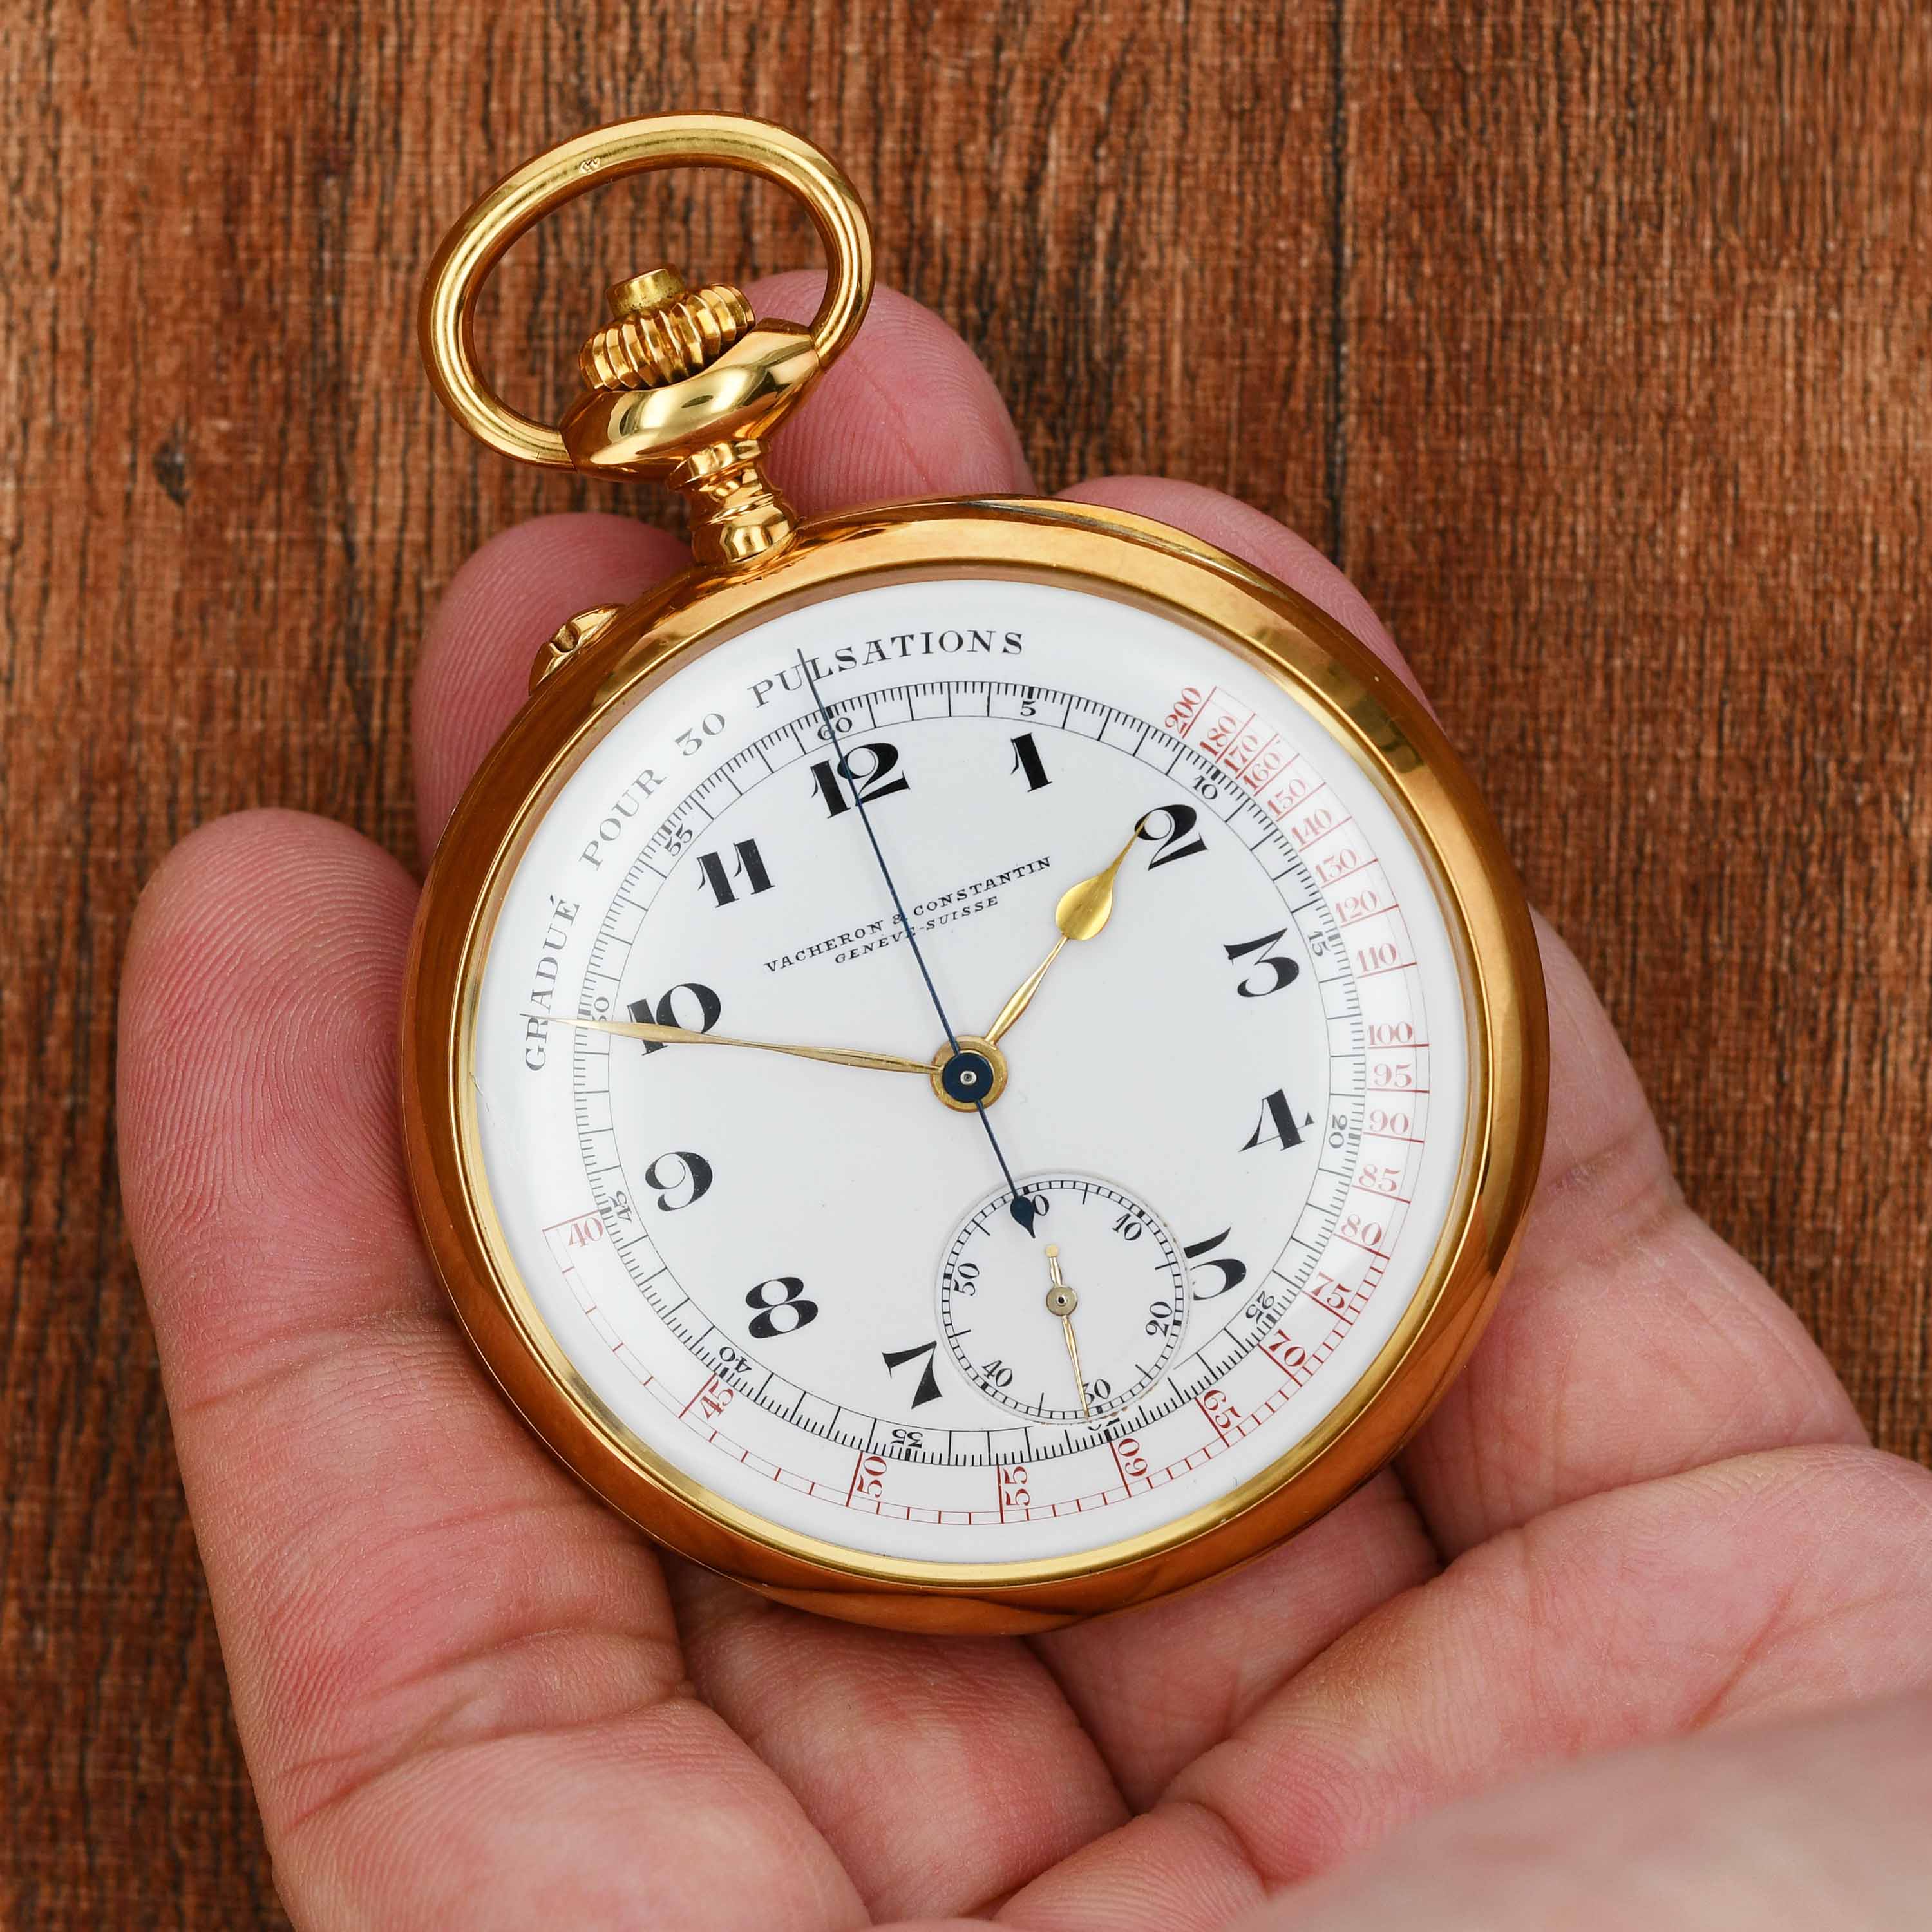 Vacheron Constantin Doctor’s pocket watch, chronograph, pulsometer scale, enamel dial in yellow gold img main3